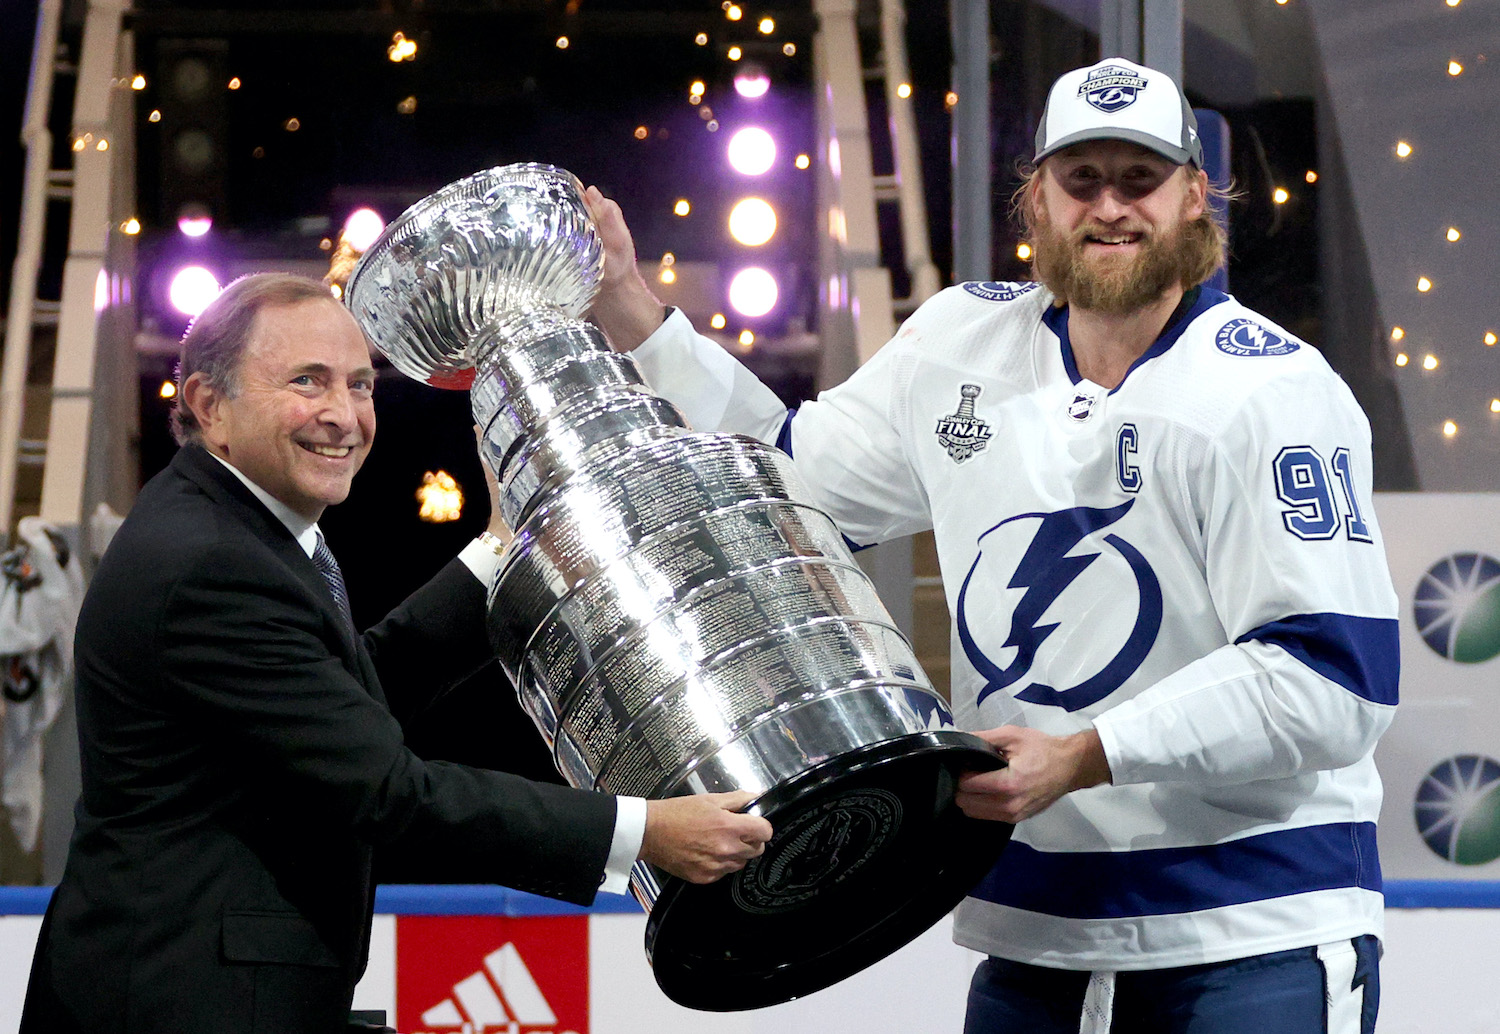 https://www.sportscasting.com/wp-content/uploads/2021/07/Stanley-Cup-Name.jpg